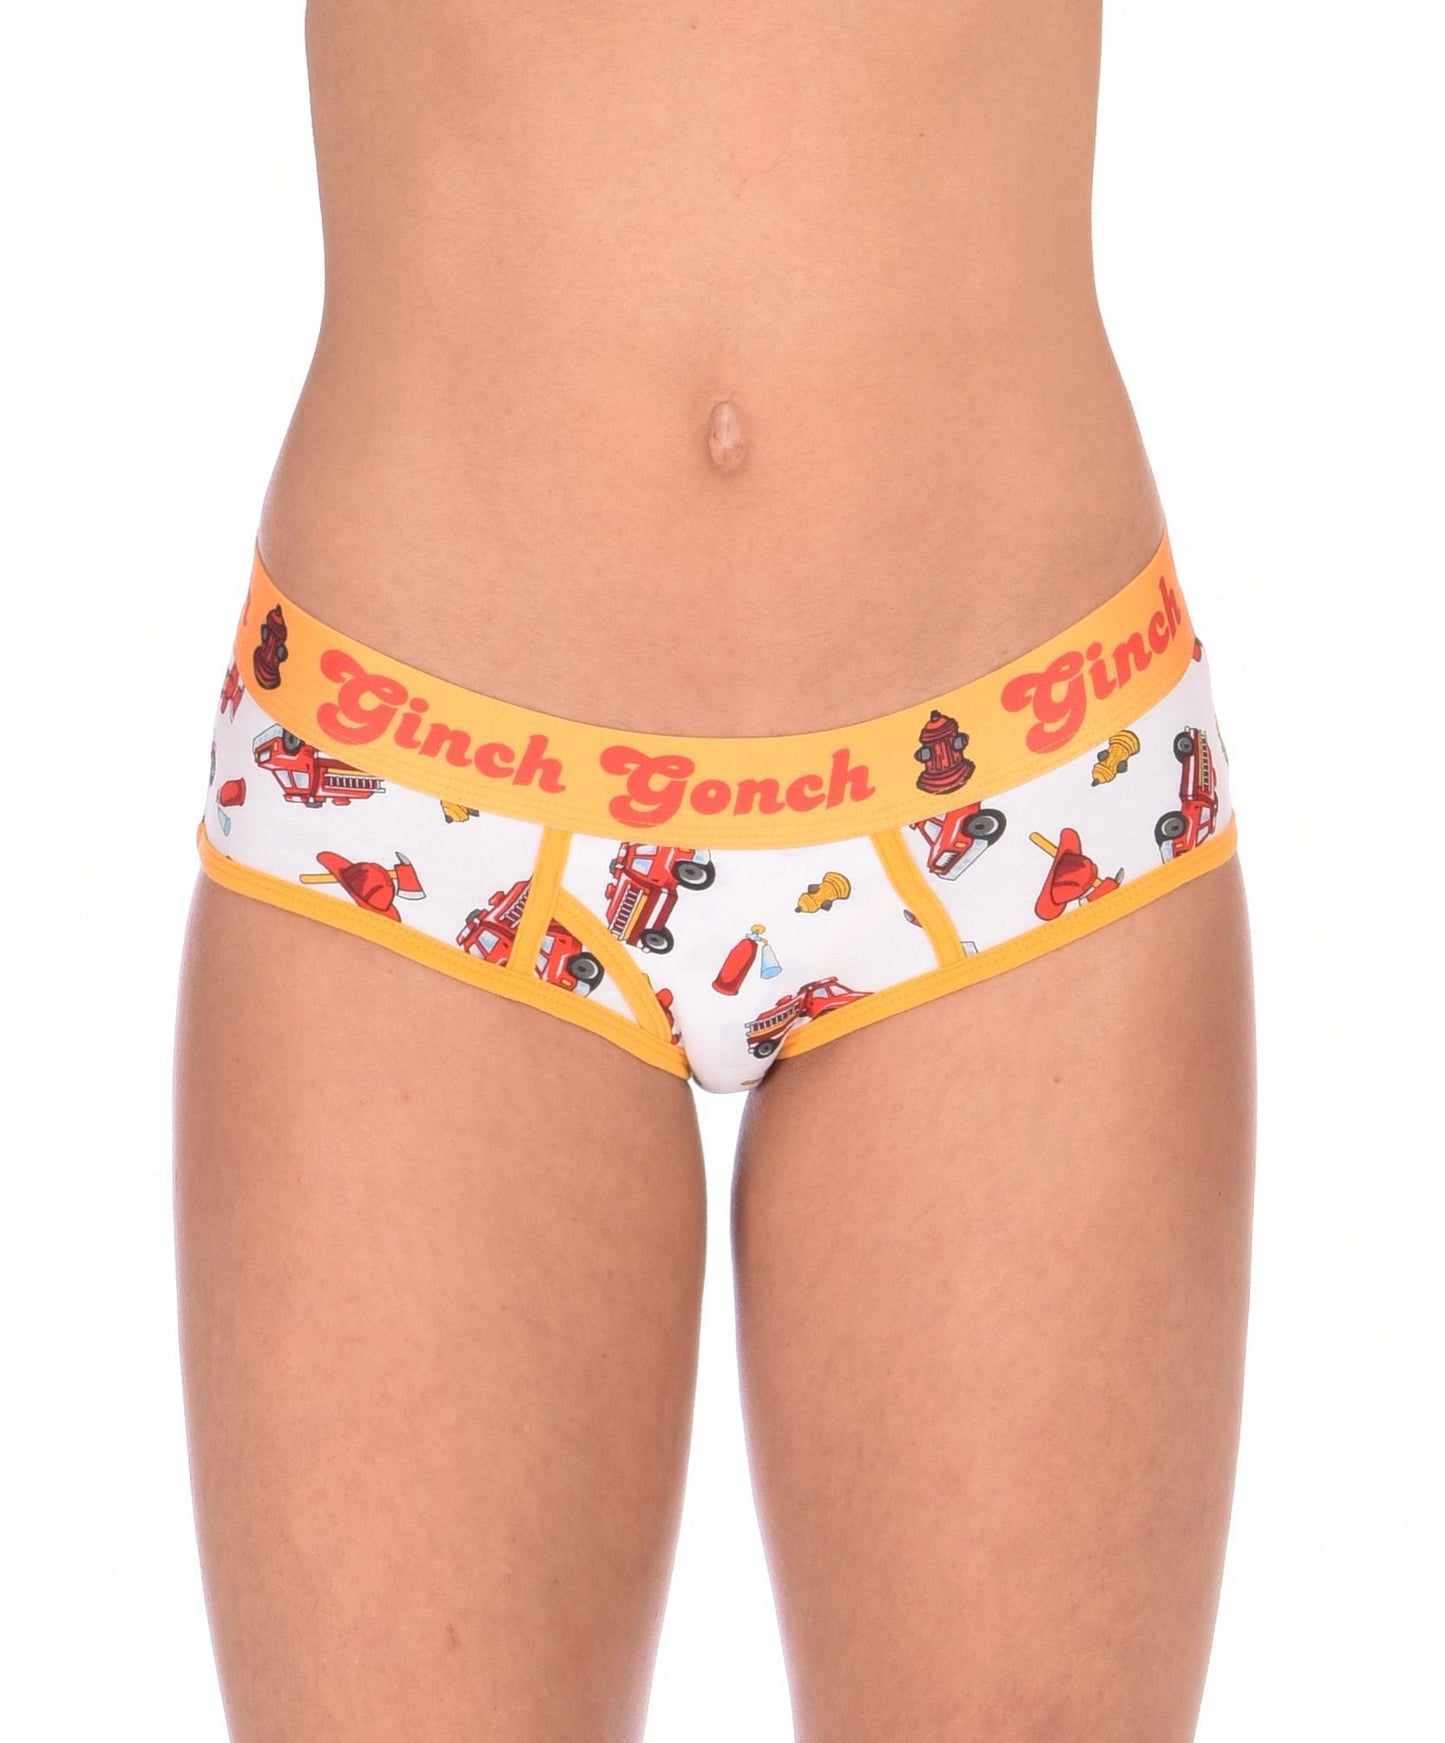 Ginch Gonch GG Fire Fighters boy cut Brief womens y front underwear white fabric with fire engines hats and hydrants, yellow trim and yellow printed waistband front